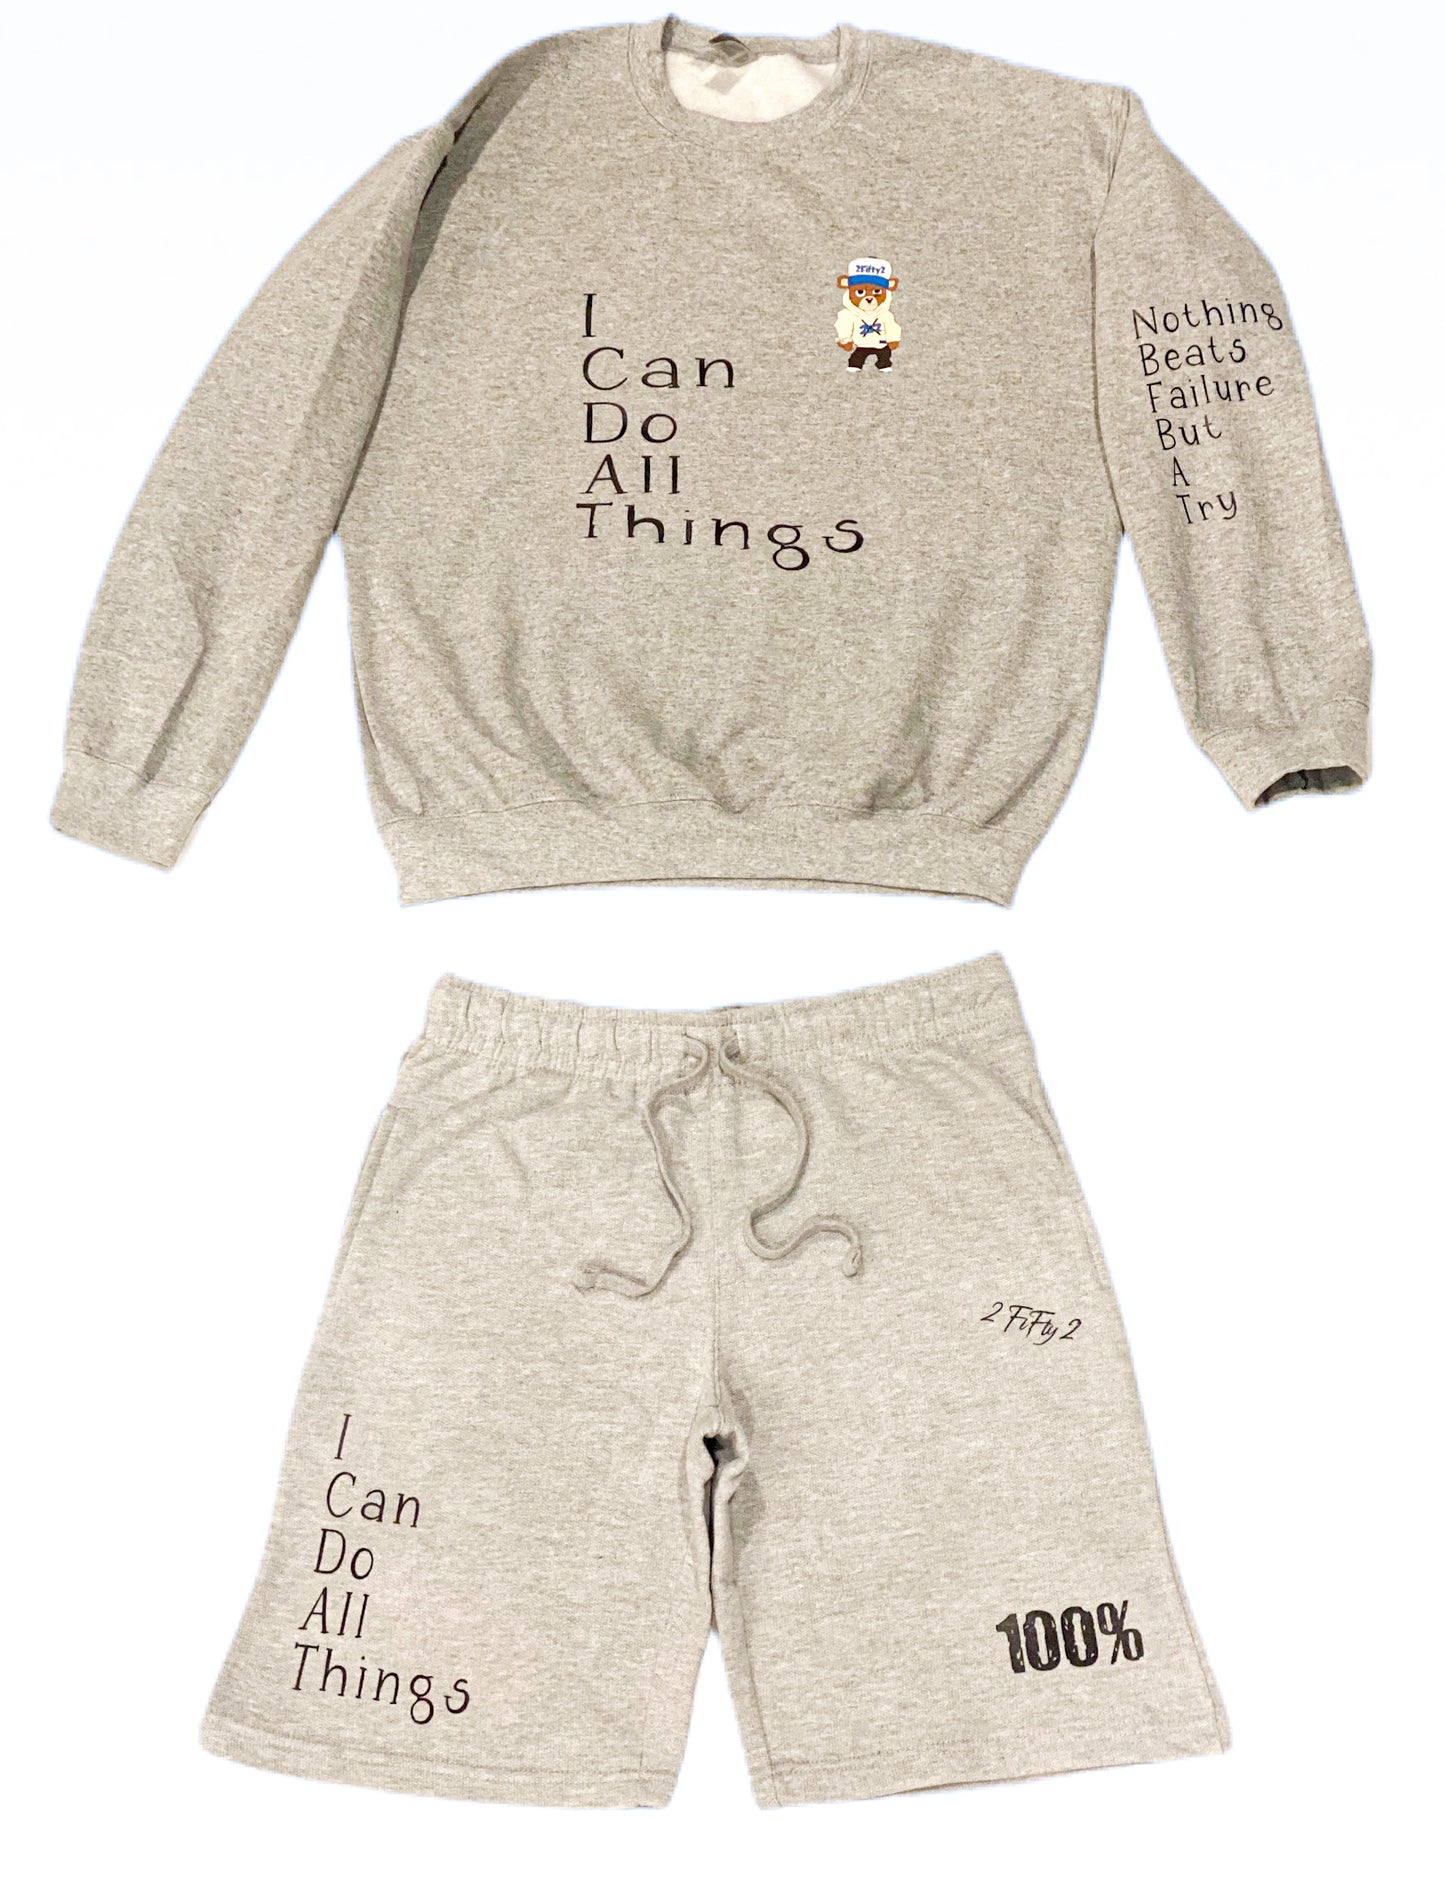 Mens crew sweatshirt (I can do all things) - 2fifty2